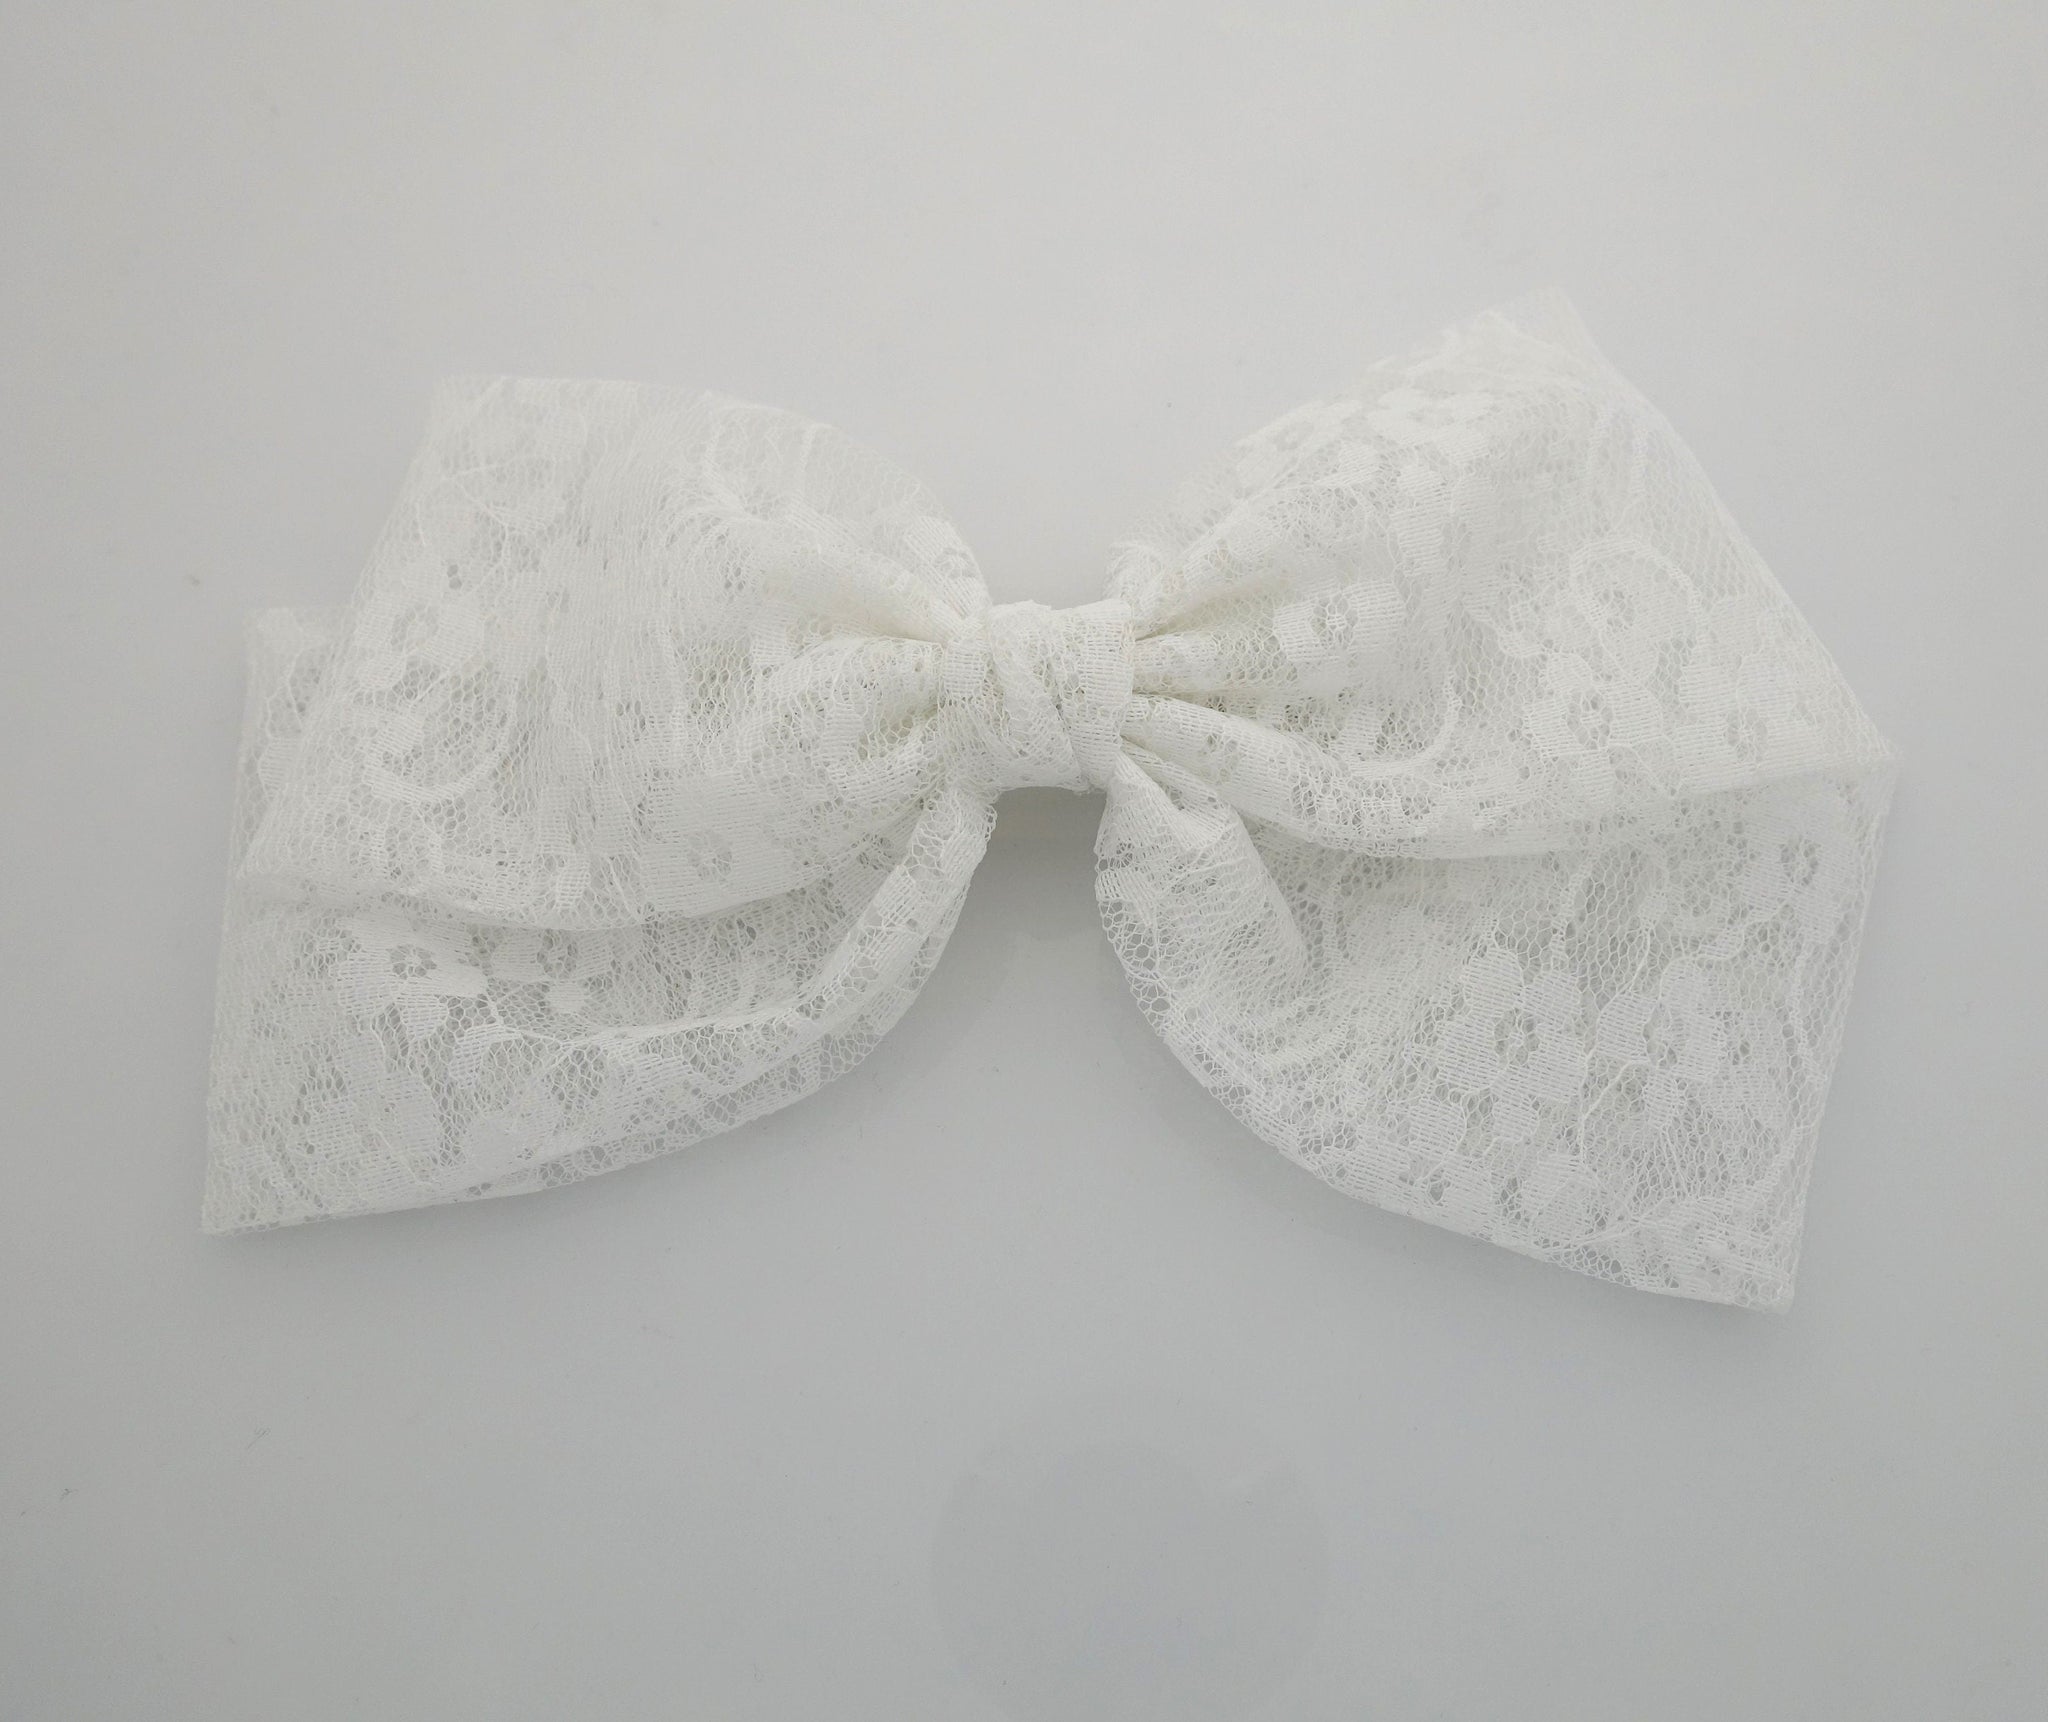 veryshine.com Barrette (Bow) White big floral lace layered bow Texas hair bow french barrette